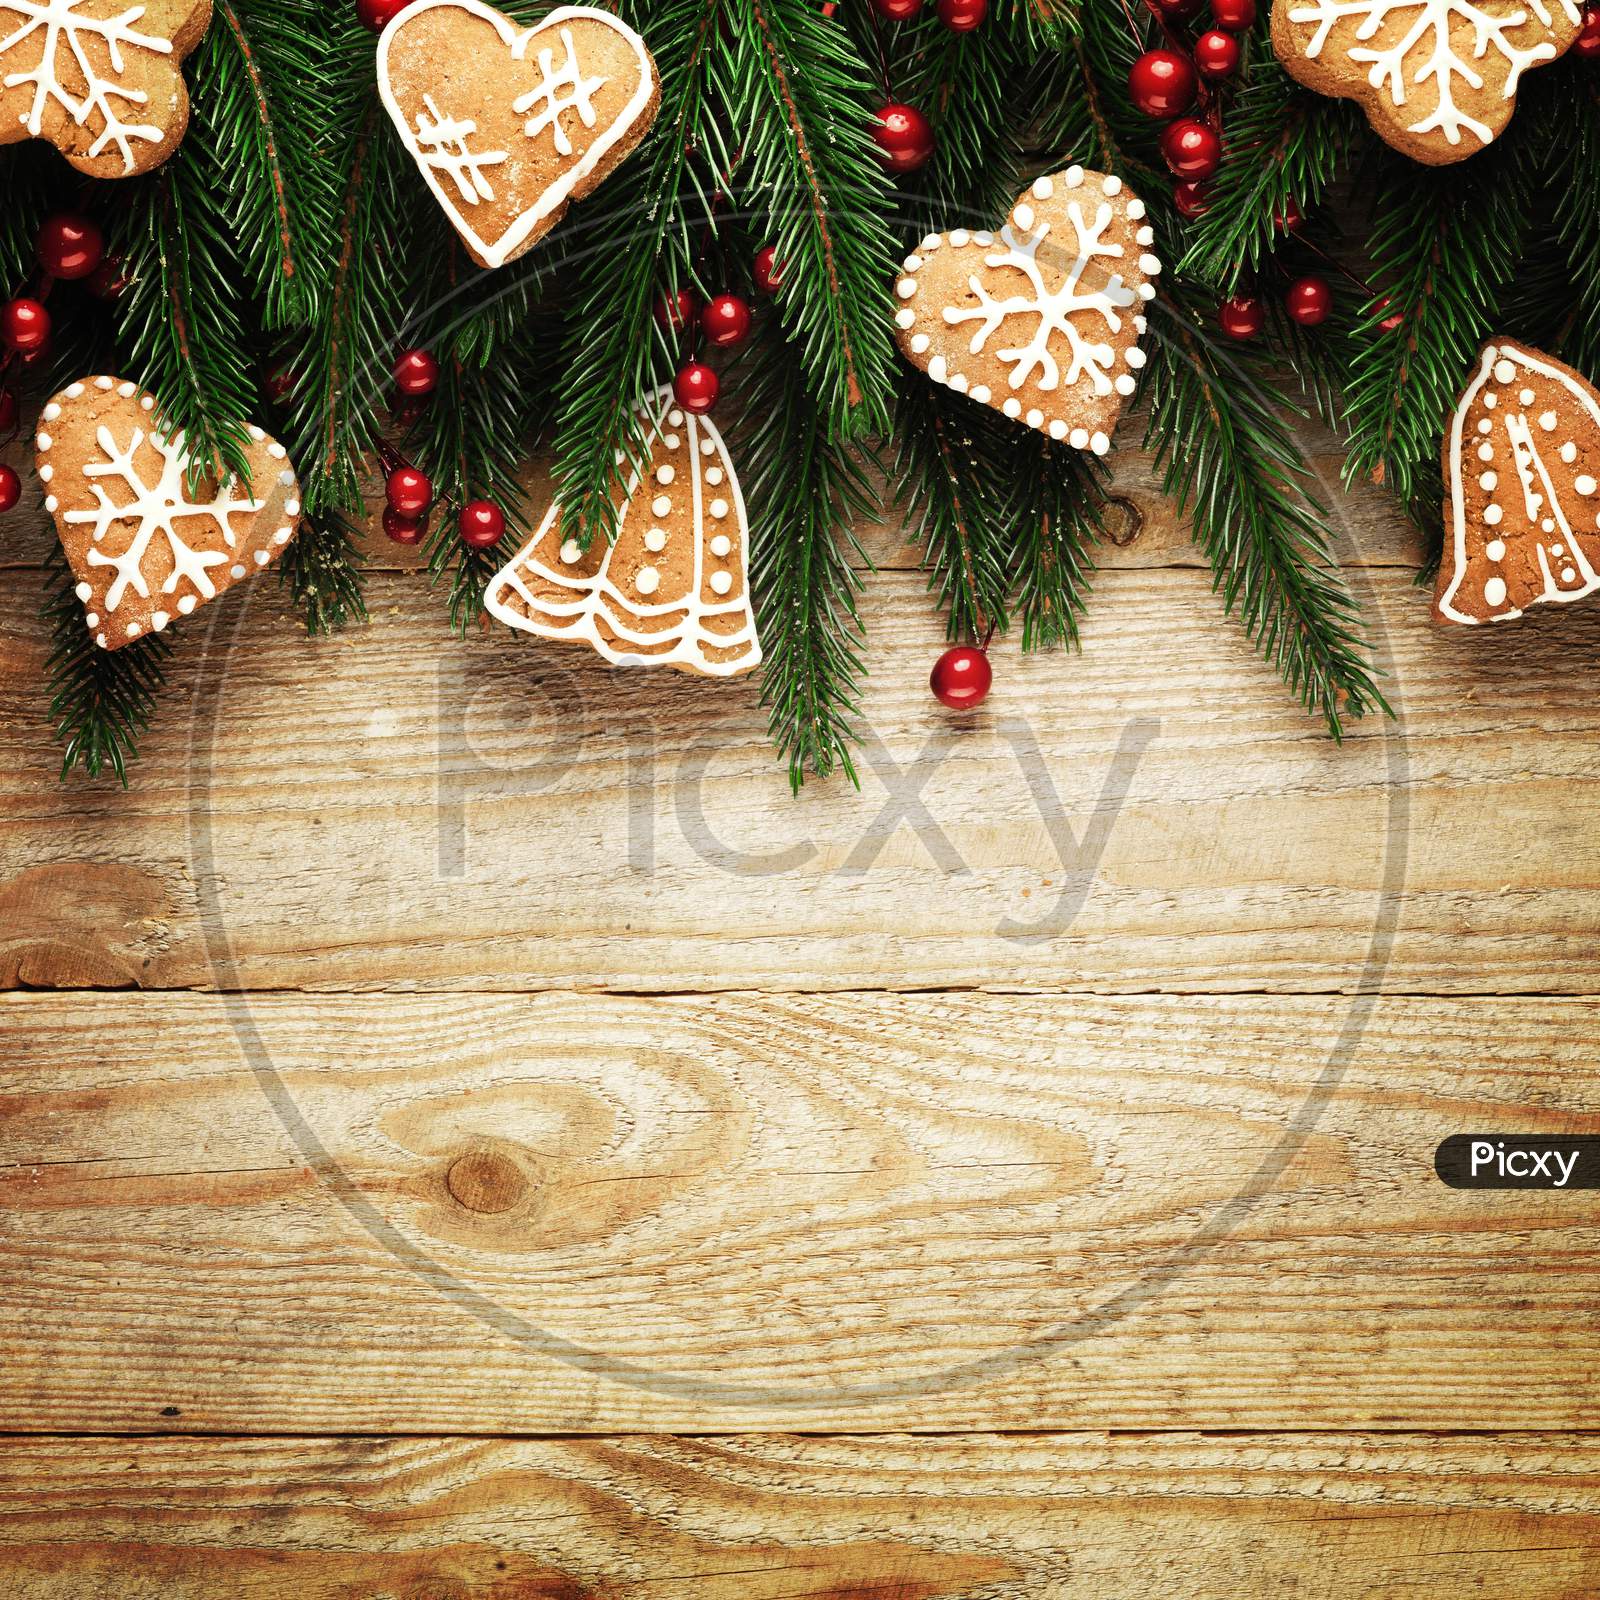 Christmas Fir Tree With Decoration On A Wooden Board